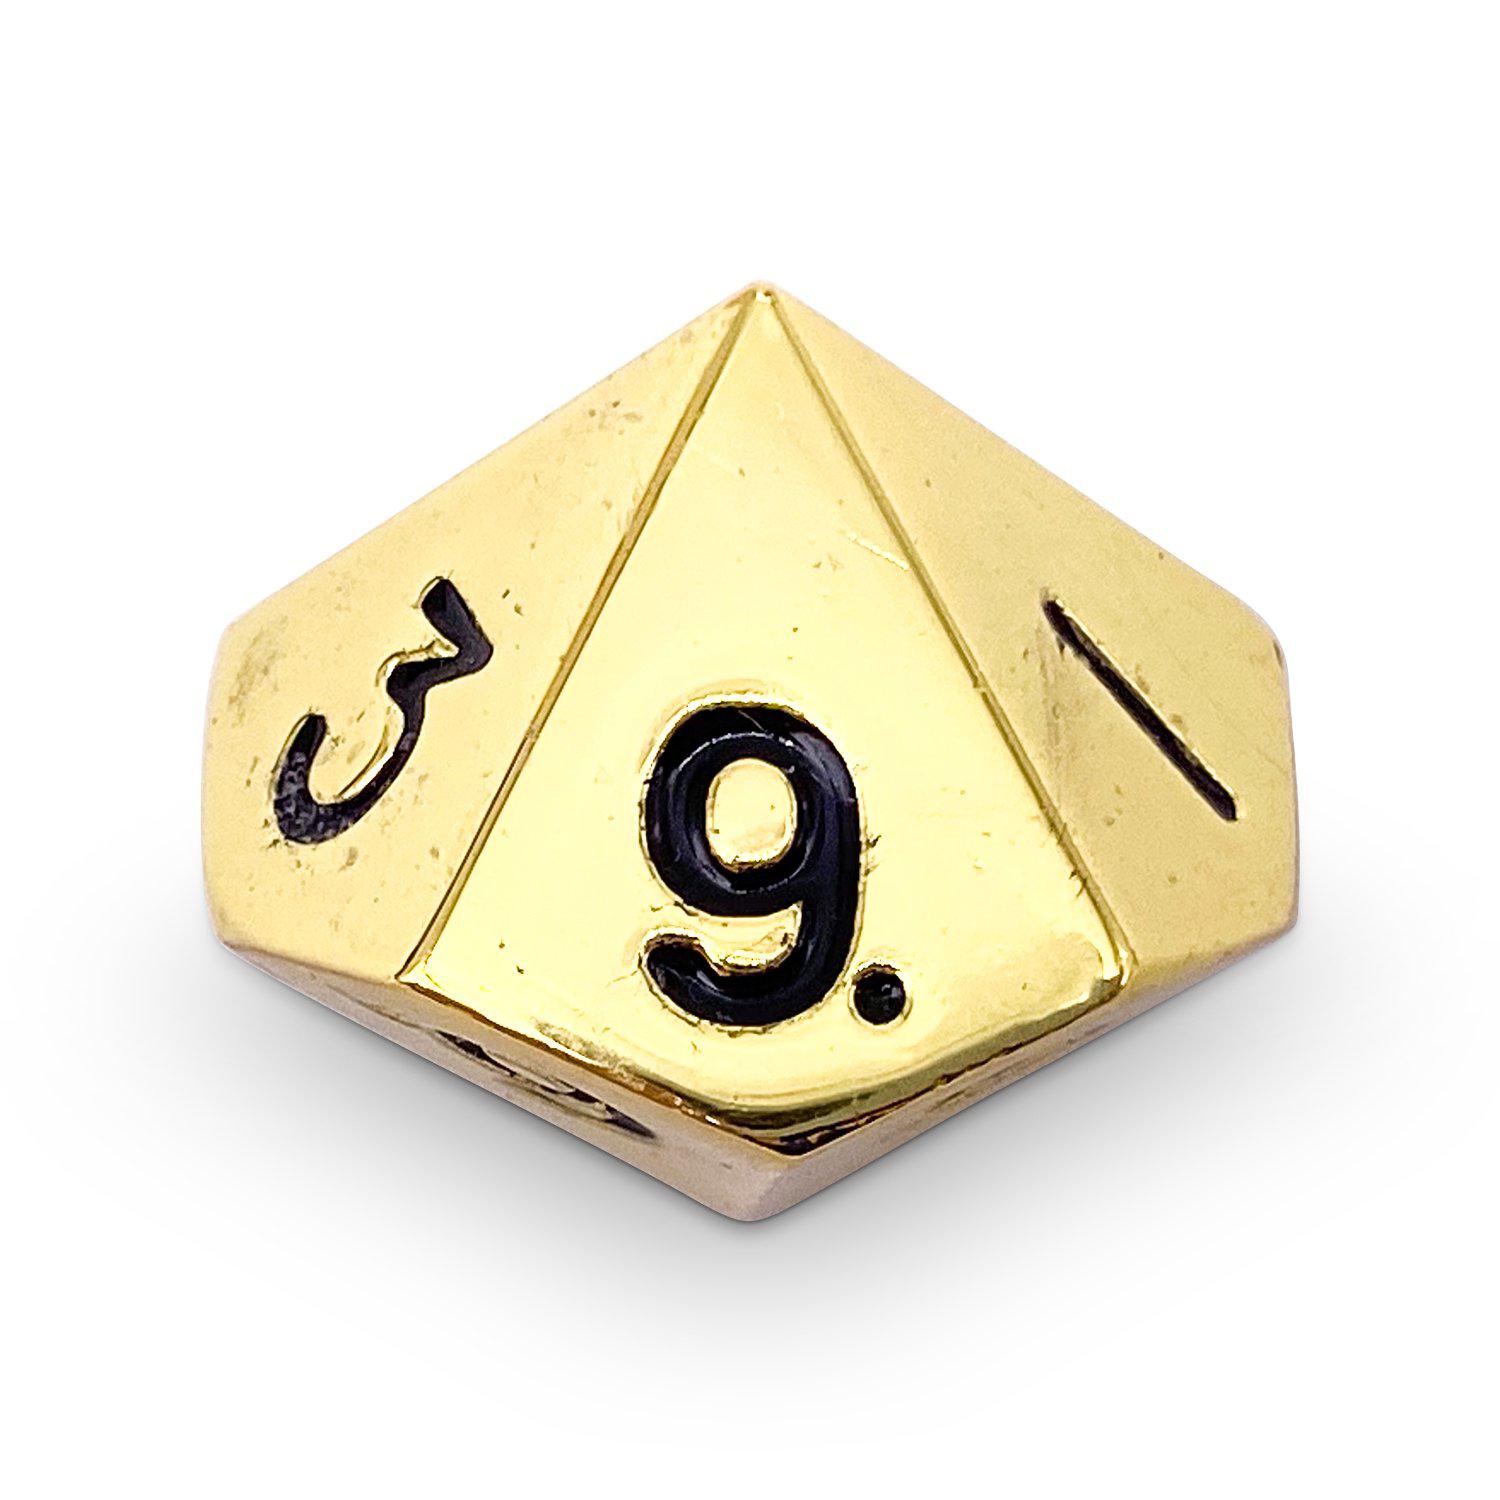 Single Alloy D10 in Dead Man's Gold by Norse Foundry - NOR 04508